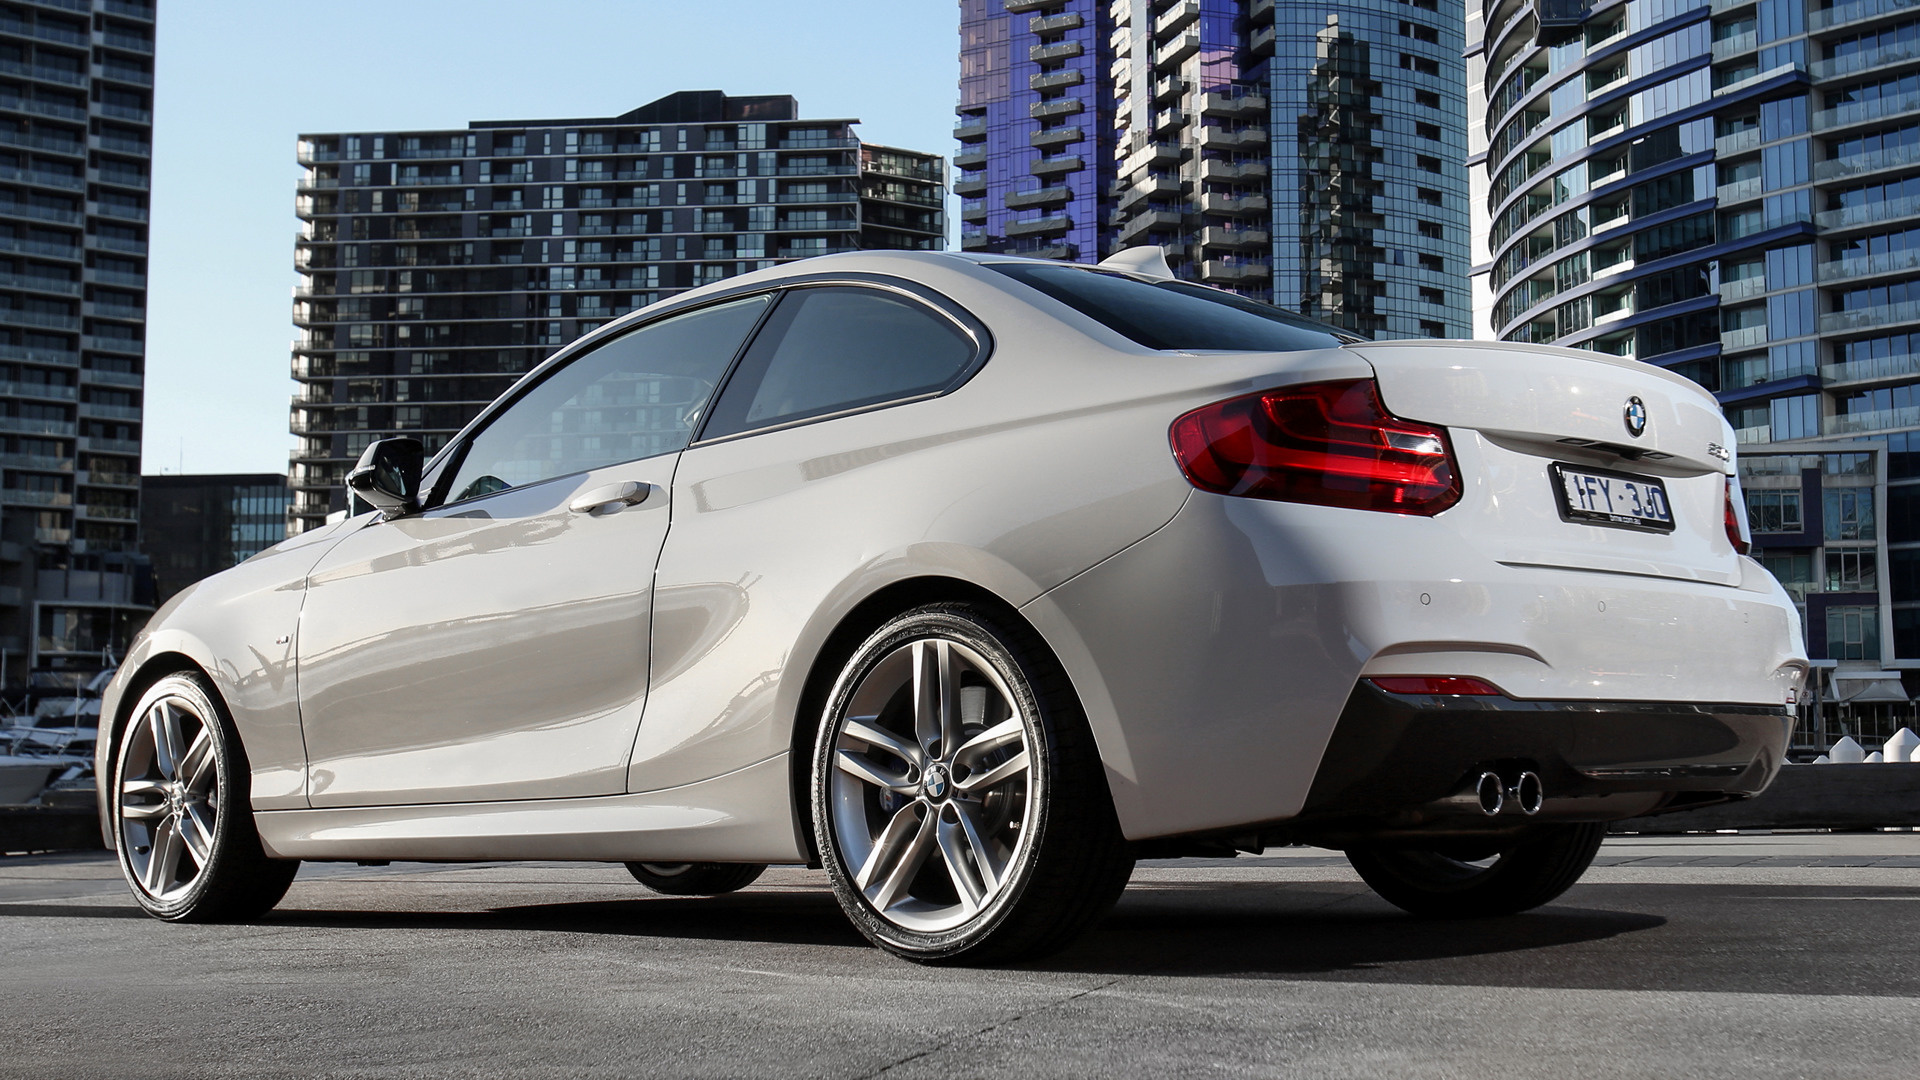 2016 Bmw M230i Coupe Hd Wallpaper Background Image 1920x1080